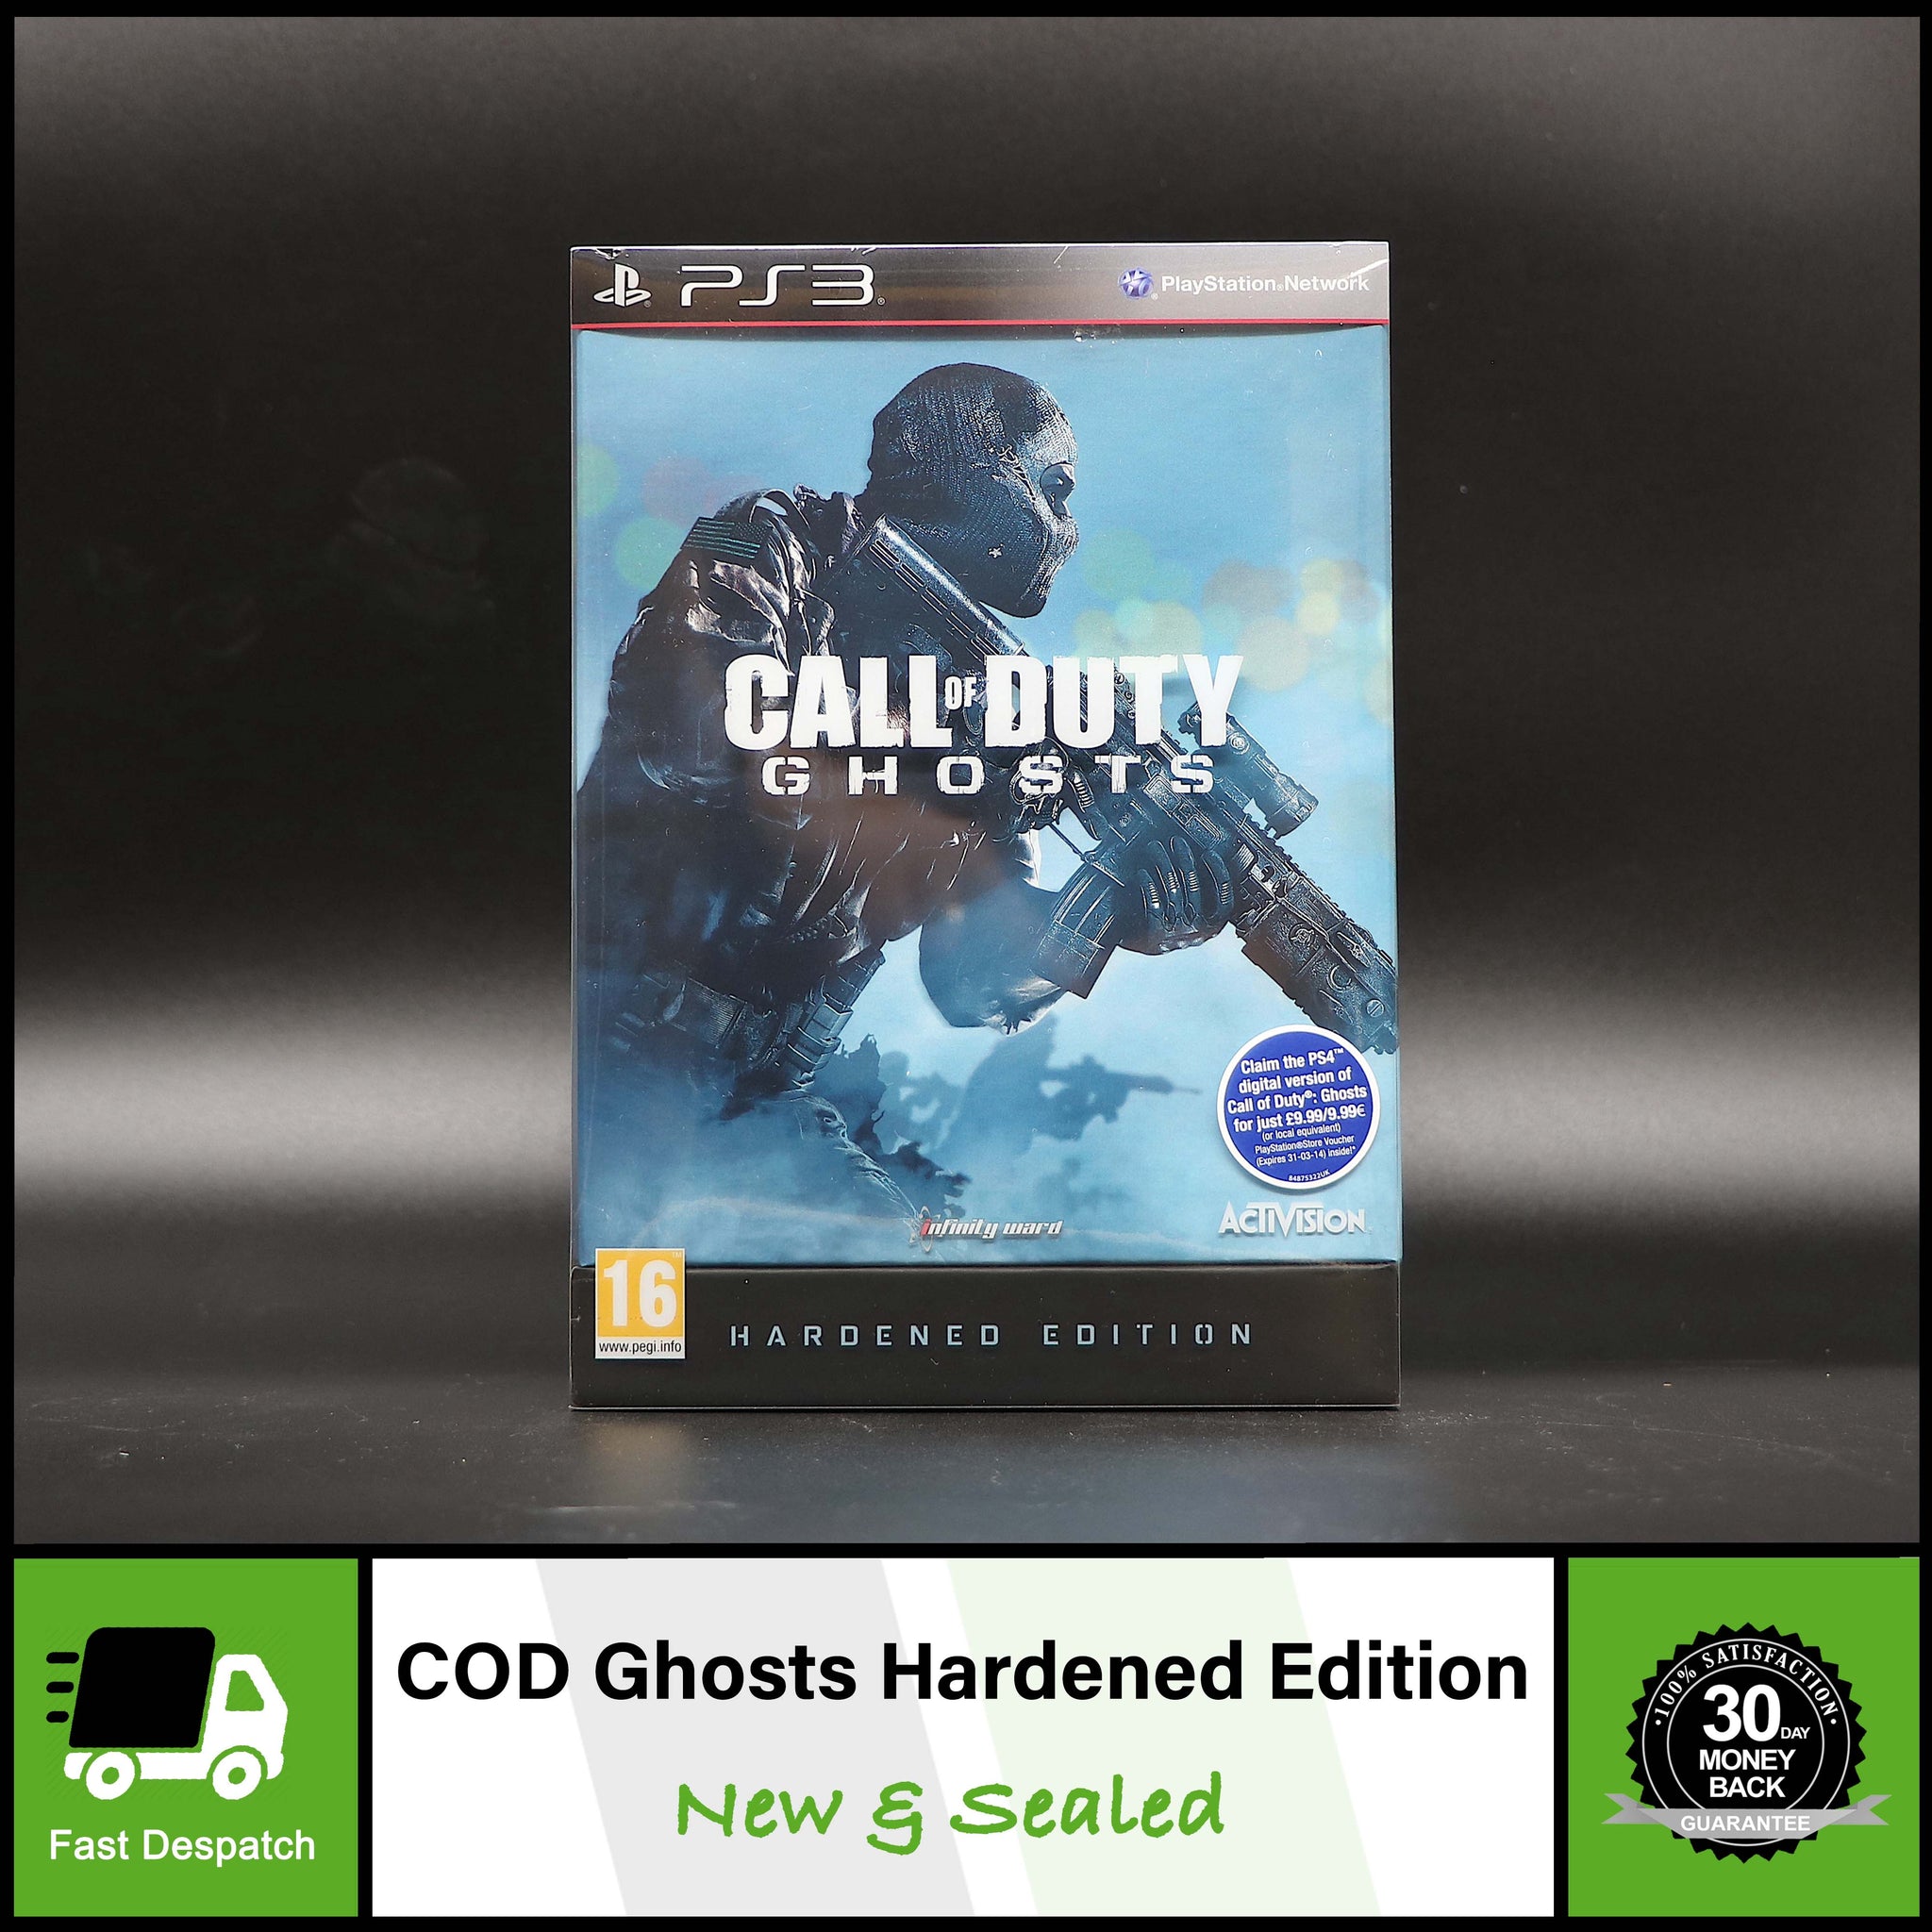 36 x Call Of Duty Ghosts | Hardened Edition | Sony Playstation 3 PS3 Game | New